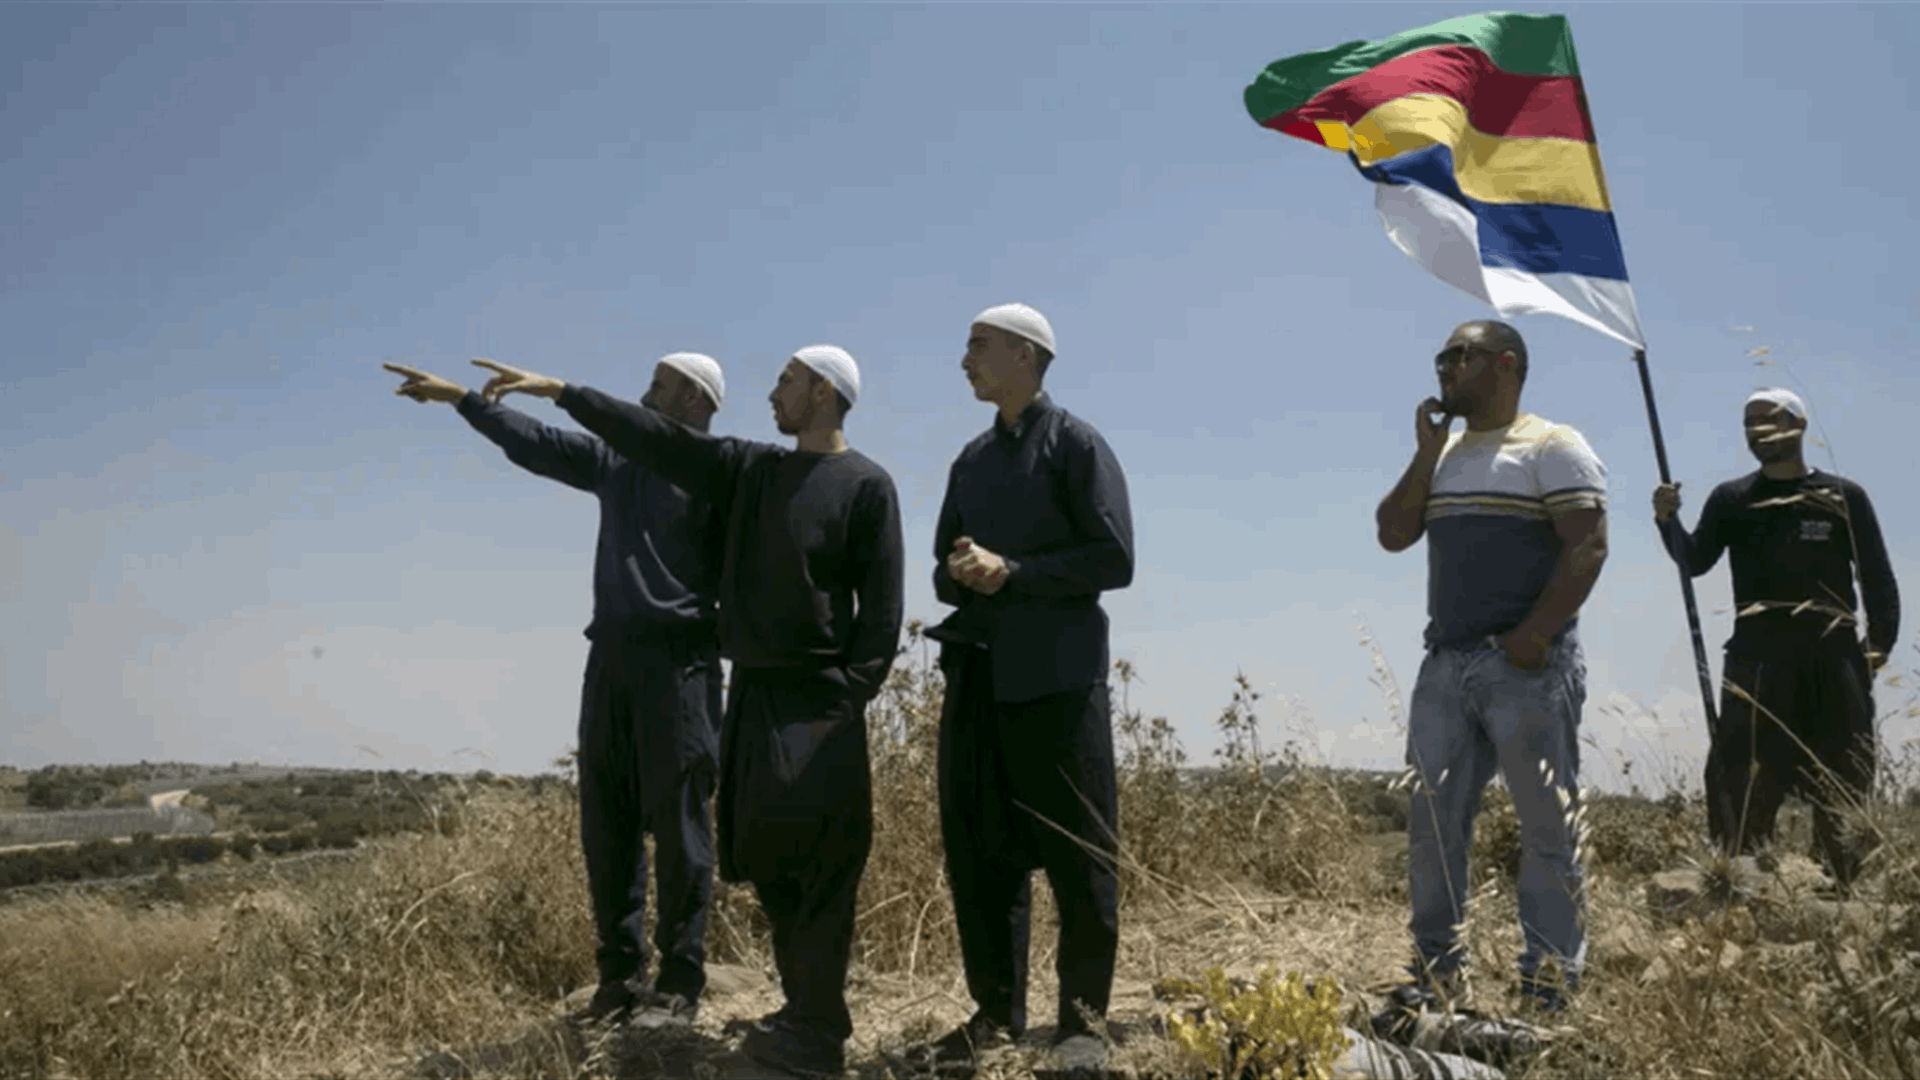 A struggle against &#39;Israelization:&#39; Druze resistance in the Golan Heights